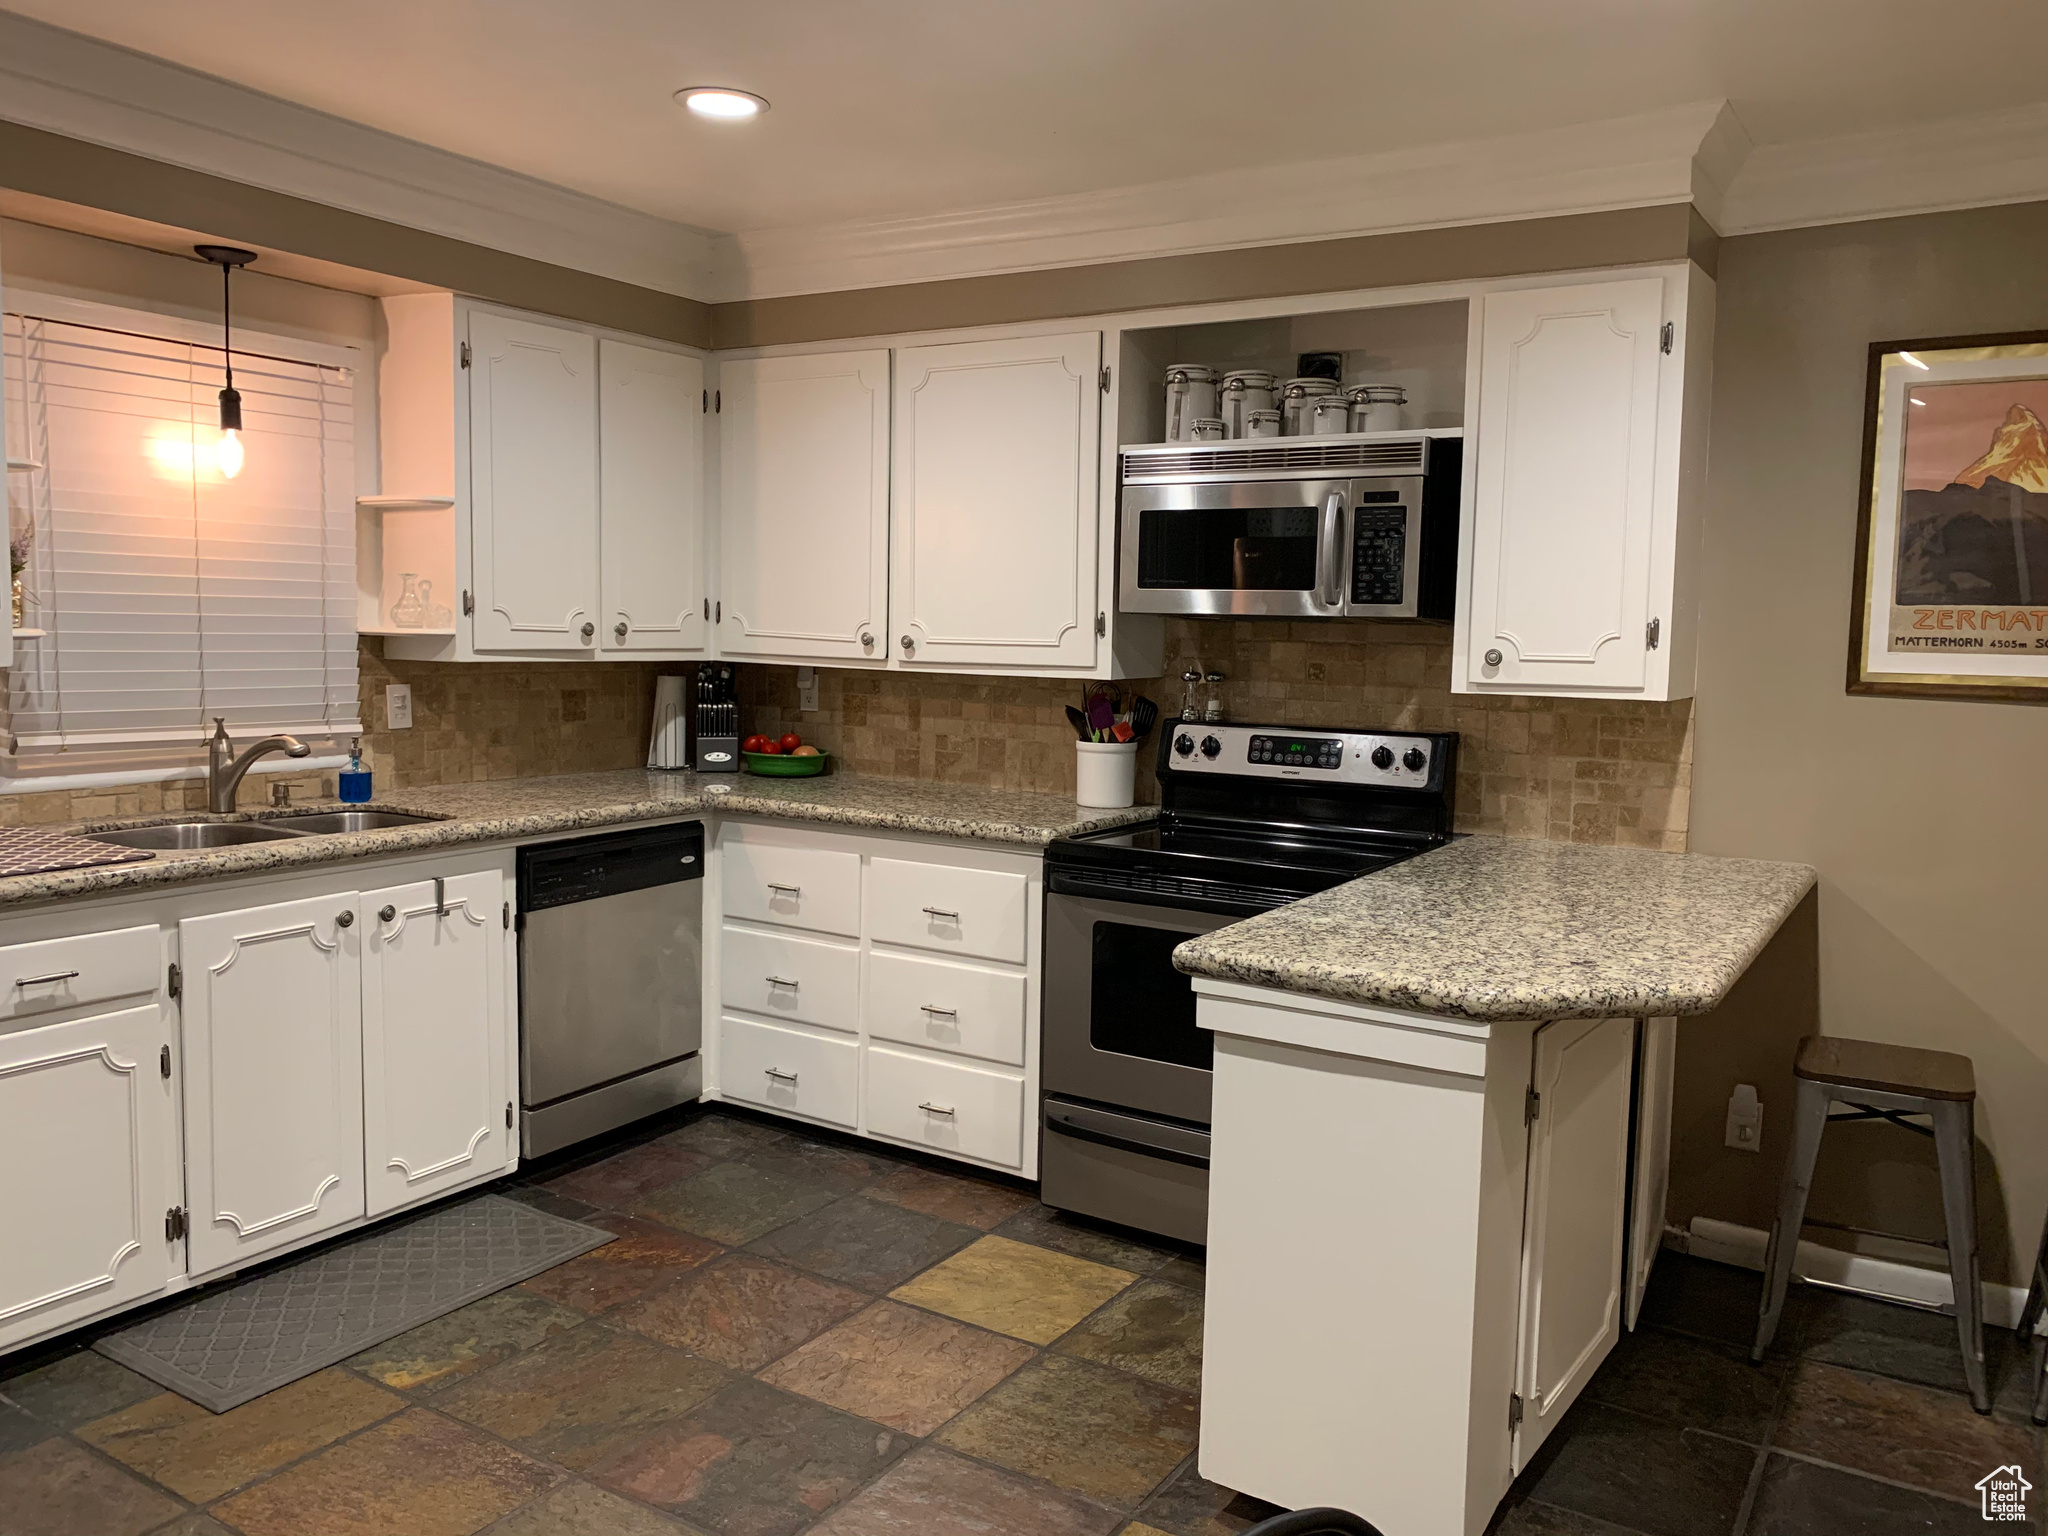 Kitchen featuring decorative light fixtures, appliances with stainless steel finishes, tasteful backsplash, white cabinets, and sink